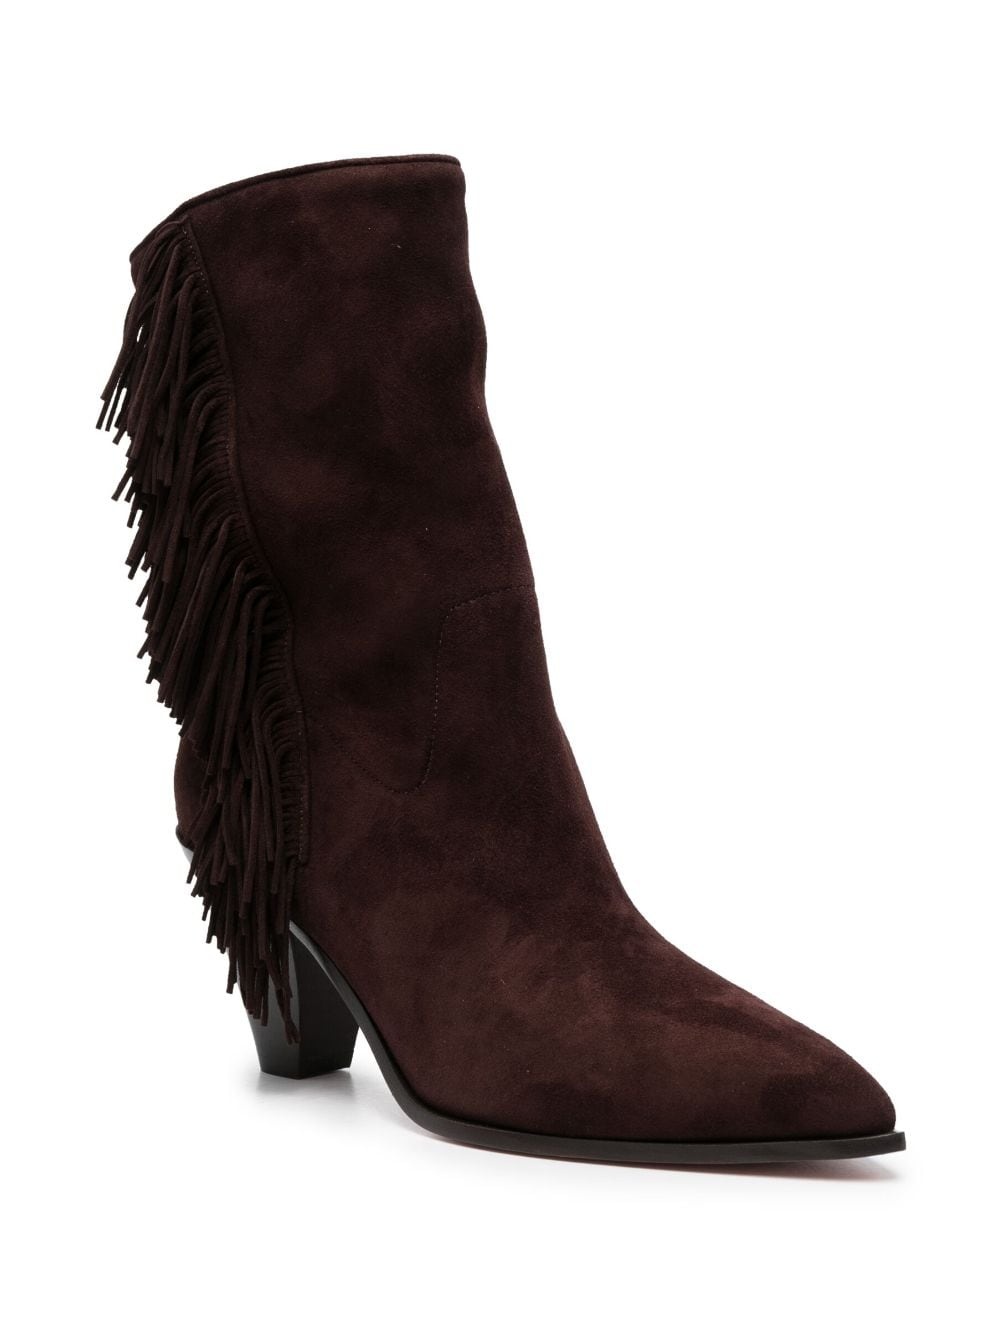 Marfa 70mm fringed suede boots - 2